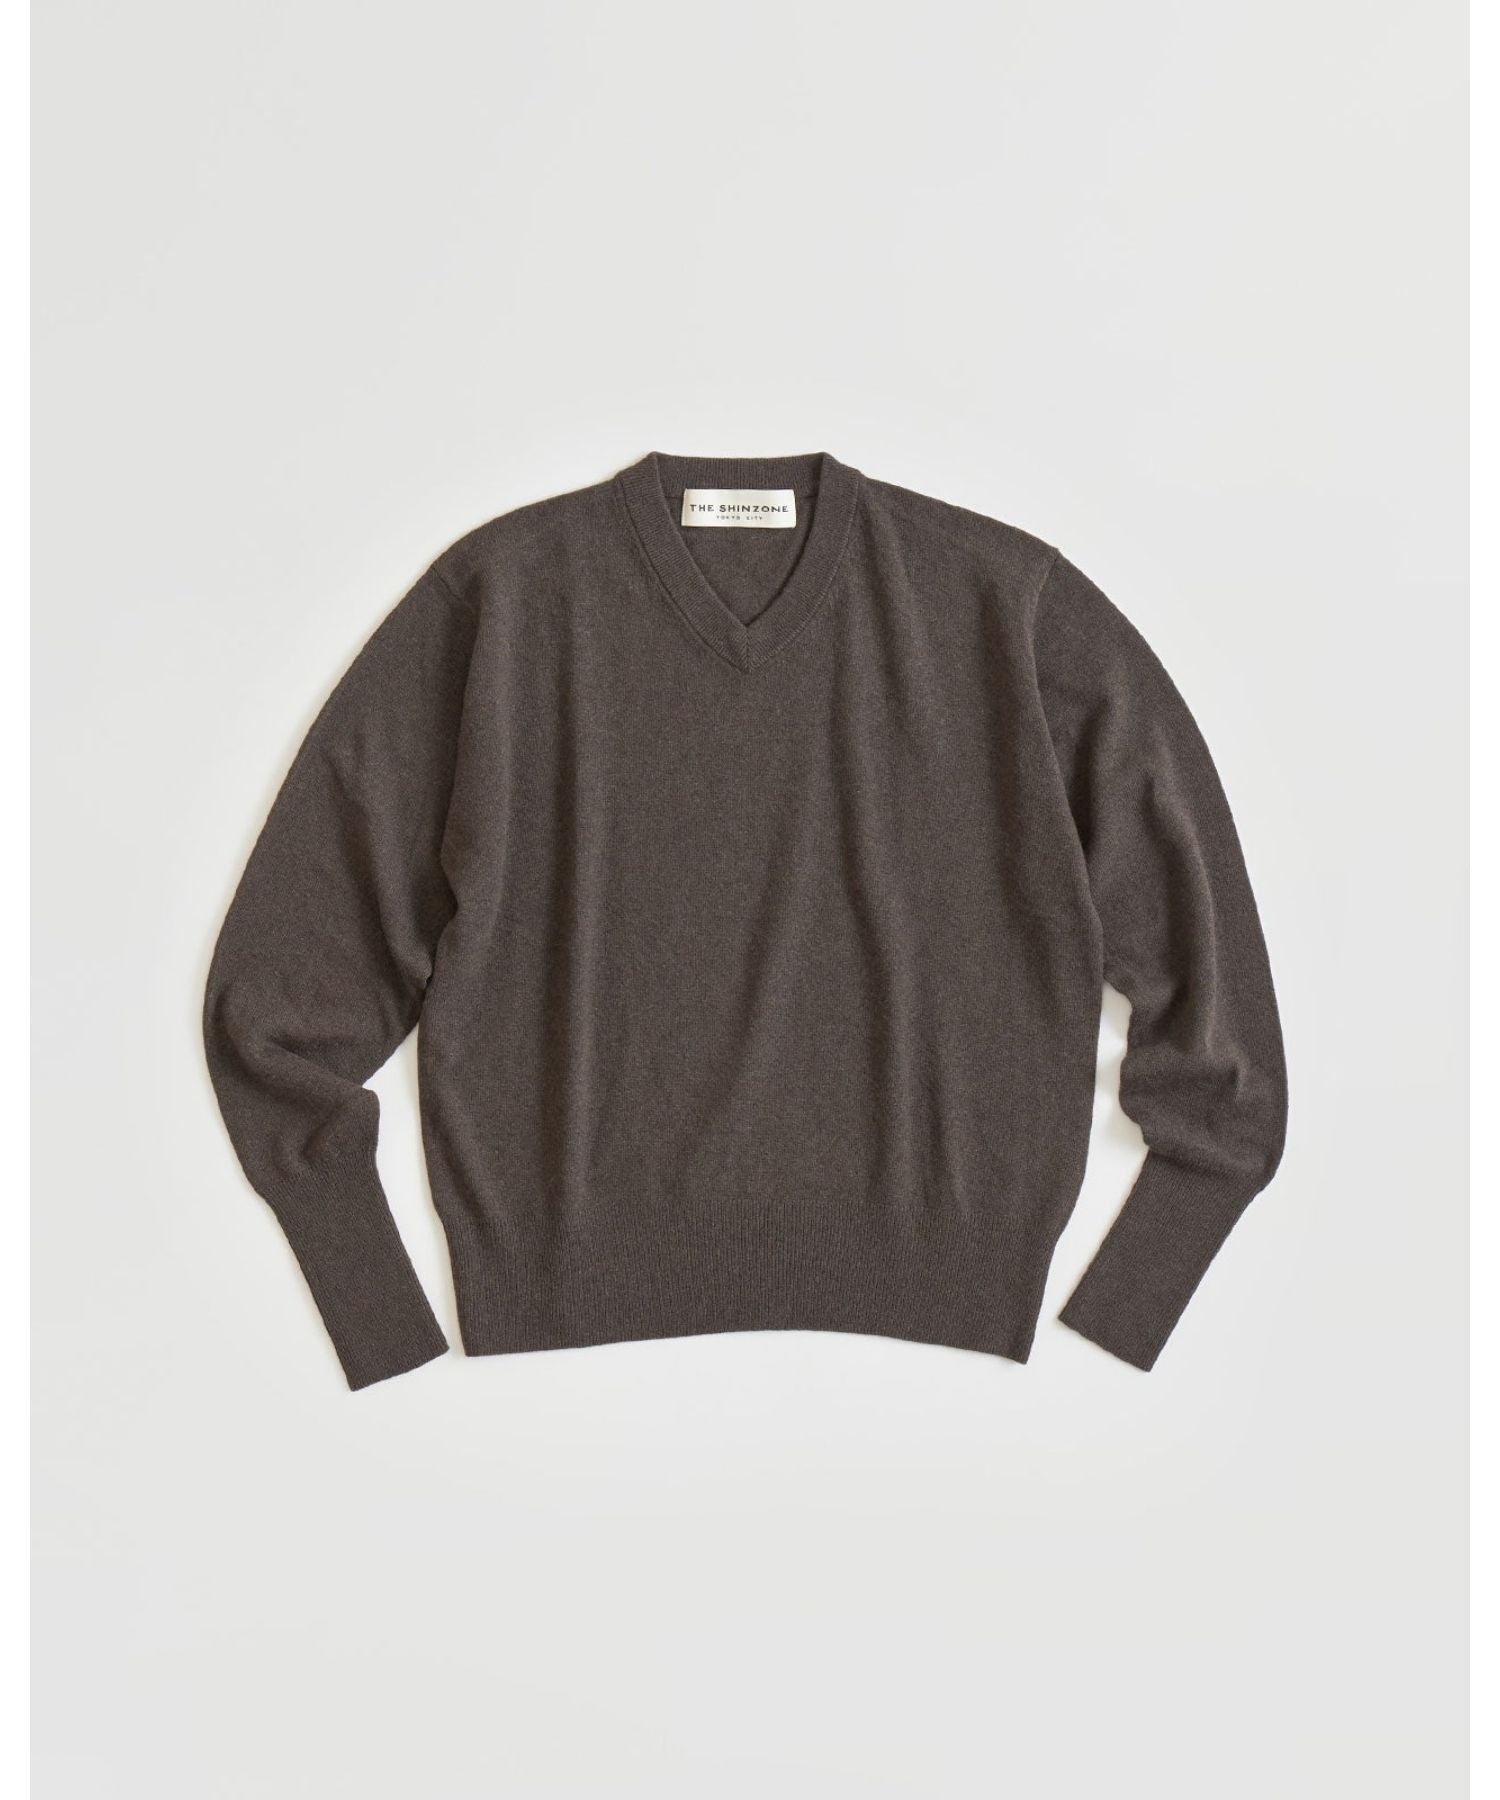 Wool Cashmere Daddy Knit - THE SHINZONE (ザ シンゾーン) - tops 